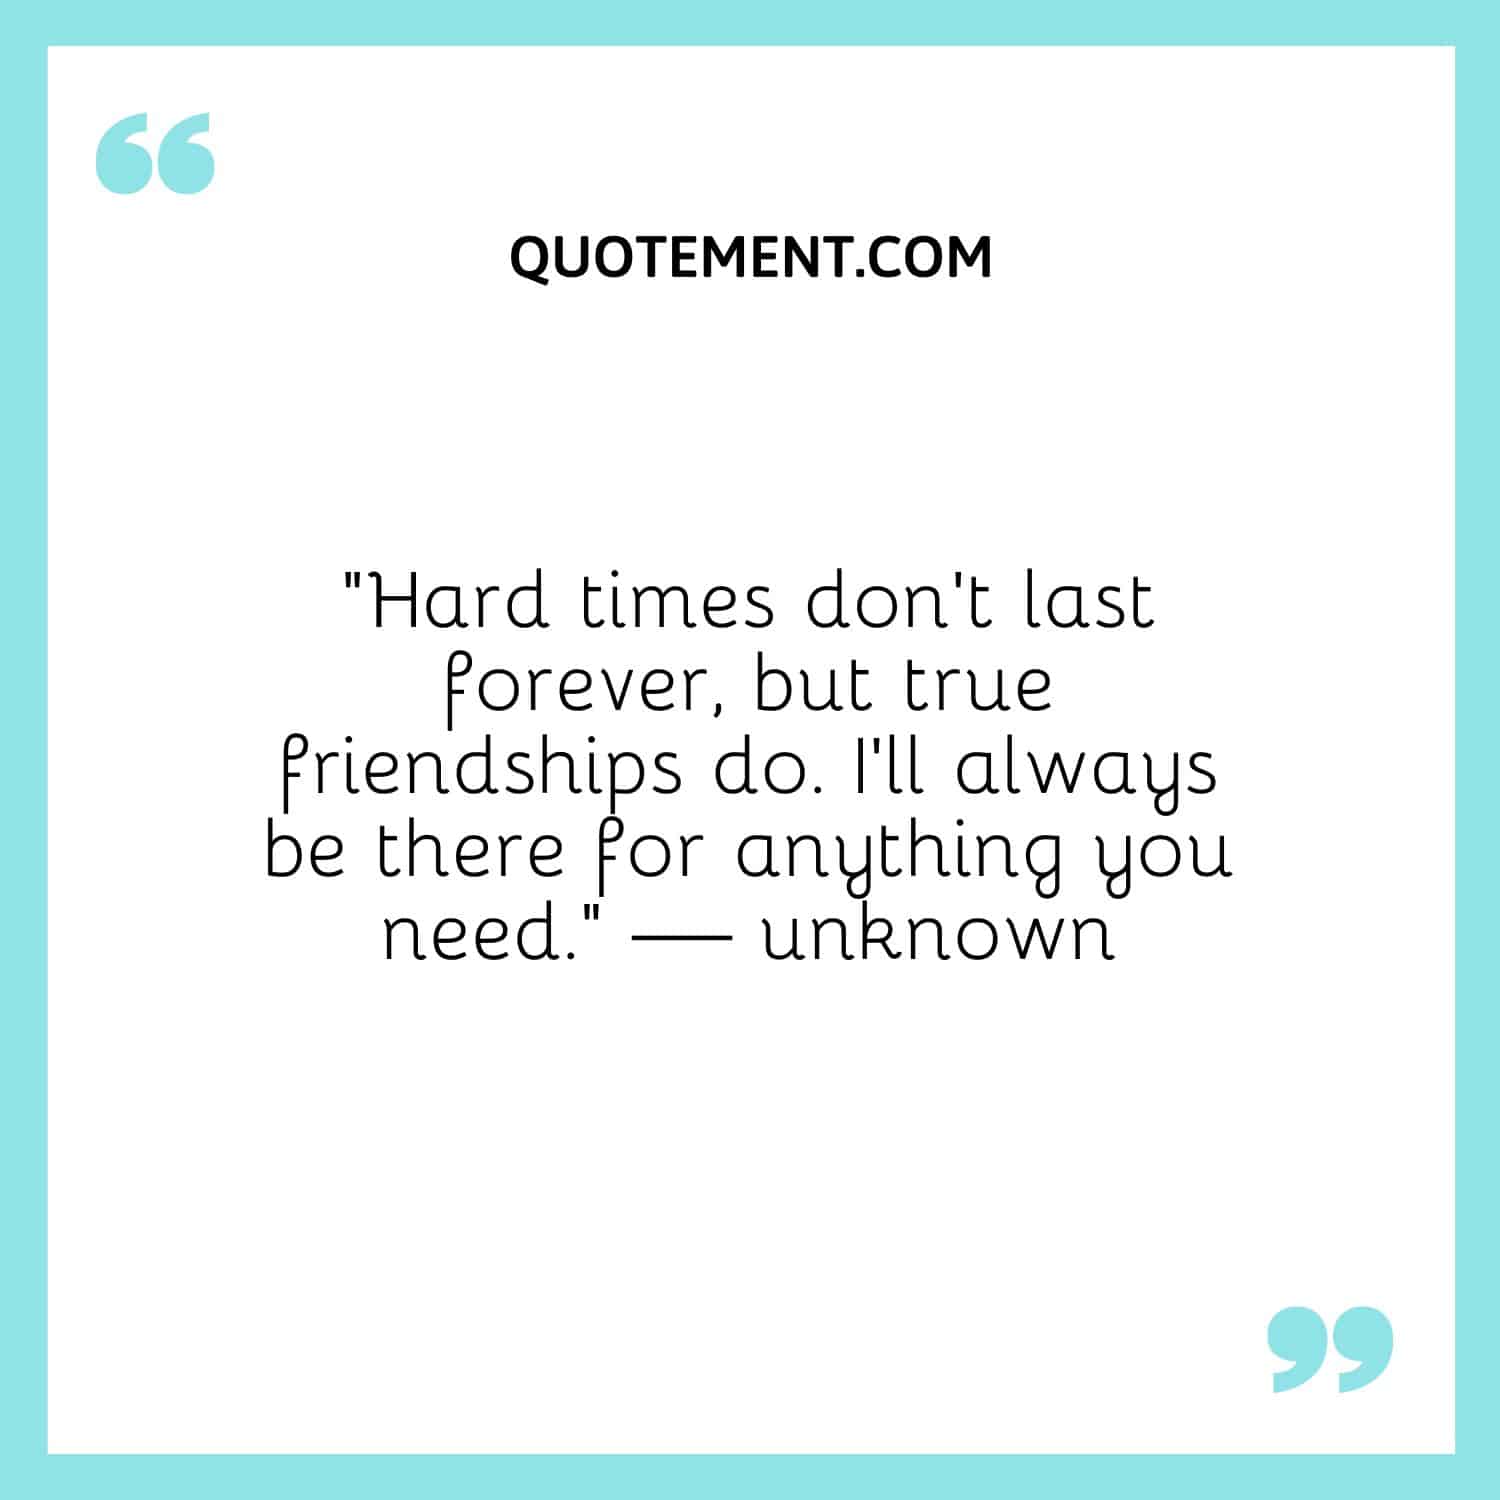 Hard times don’t last forever